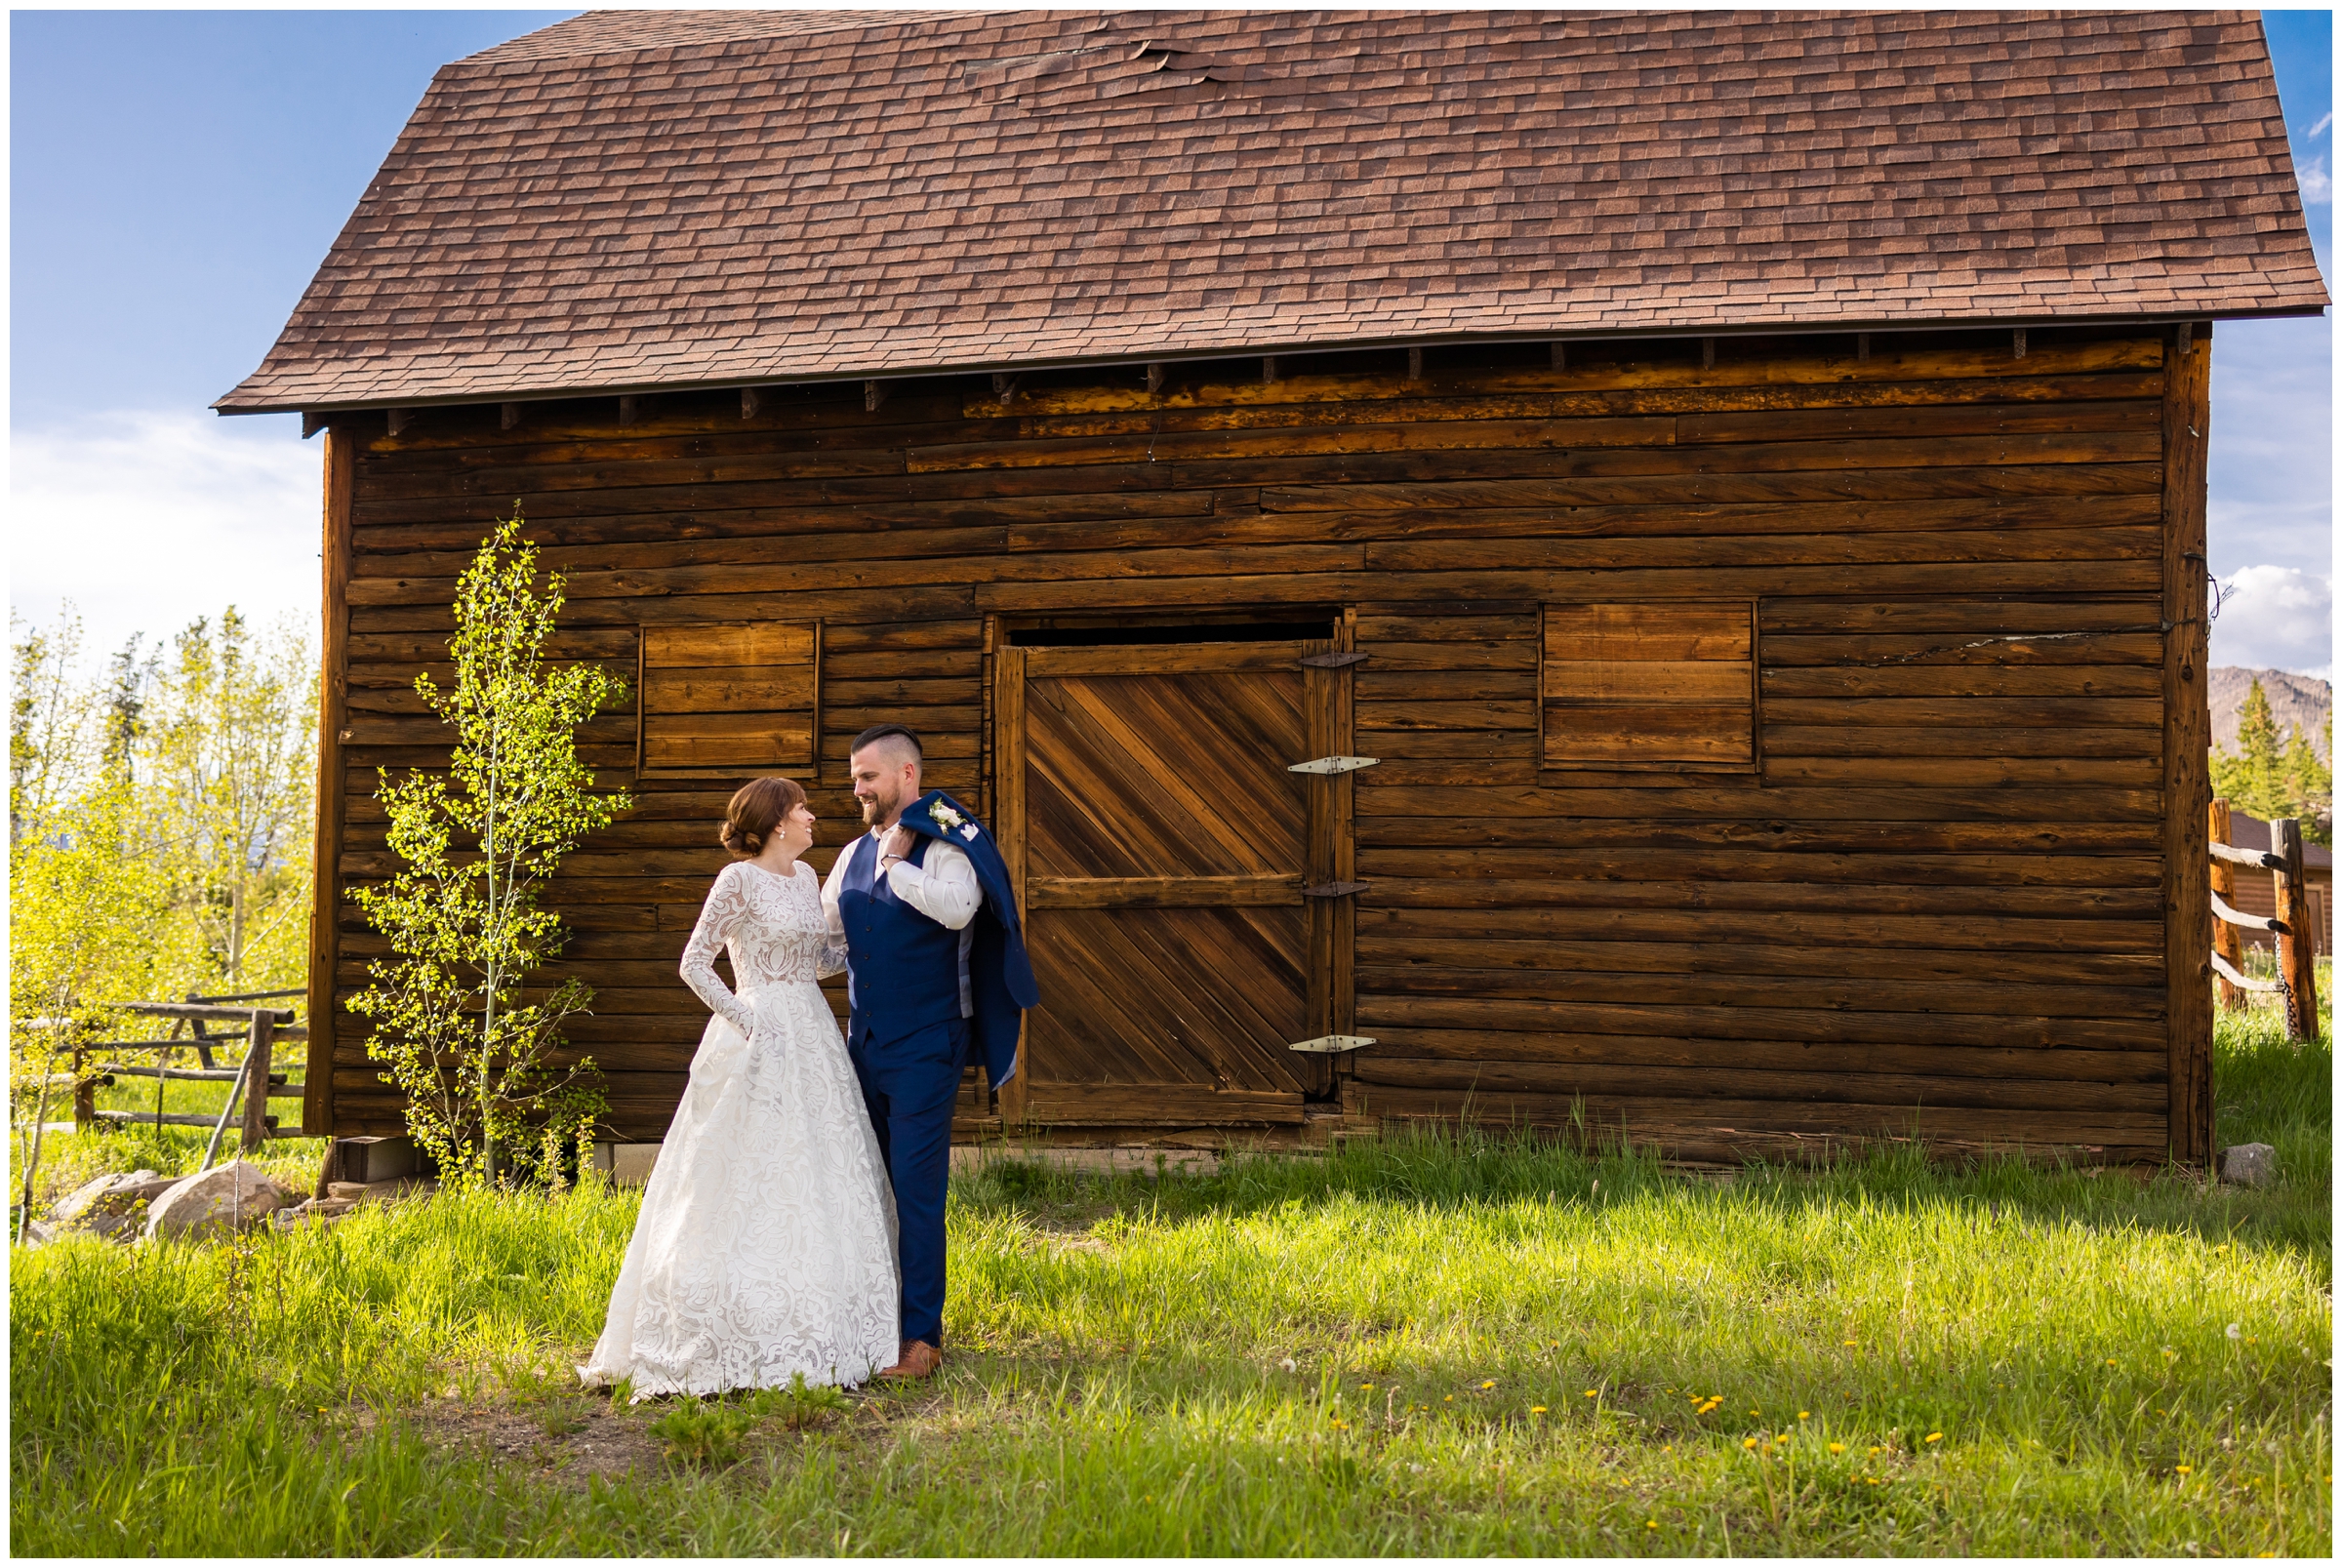 couple posing in front of wooden barn during rustic wedding pictures at the Grand Lake Lodge 